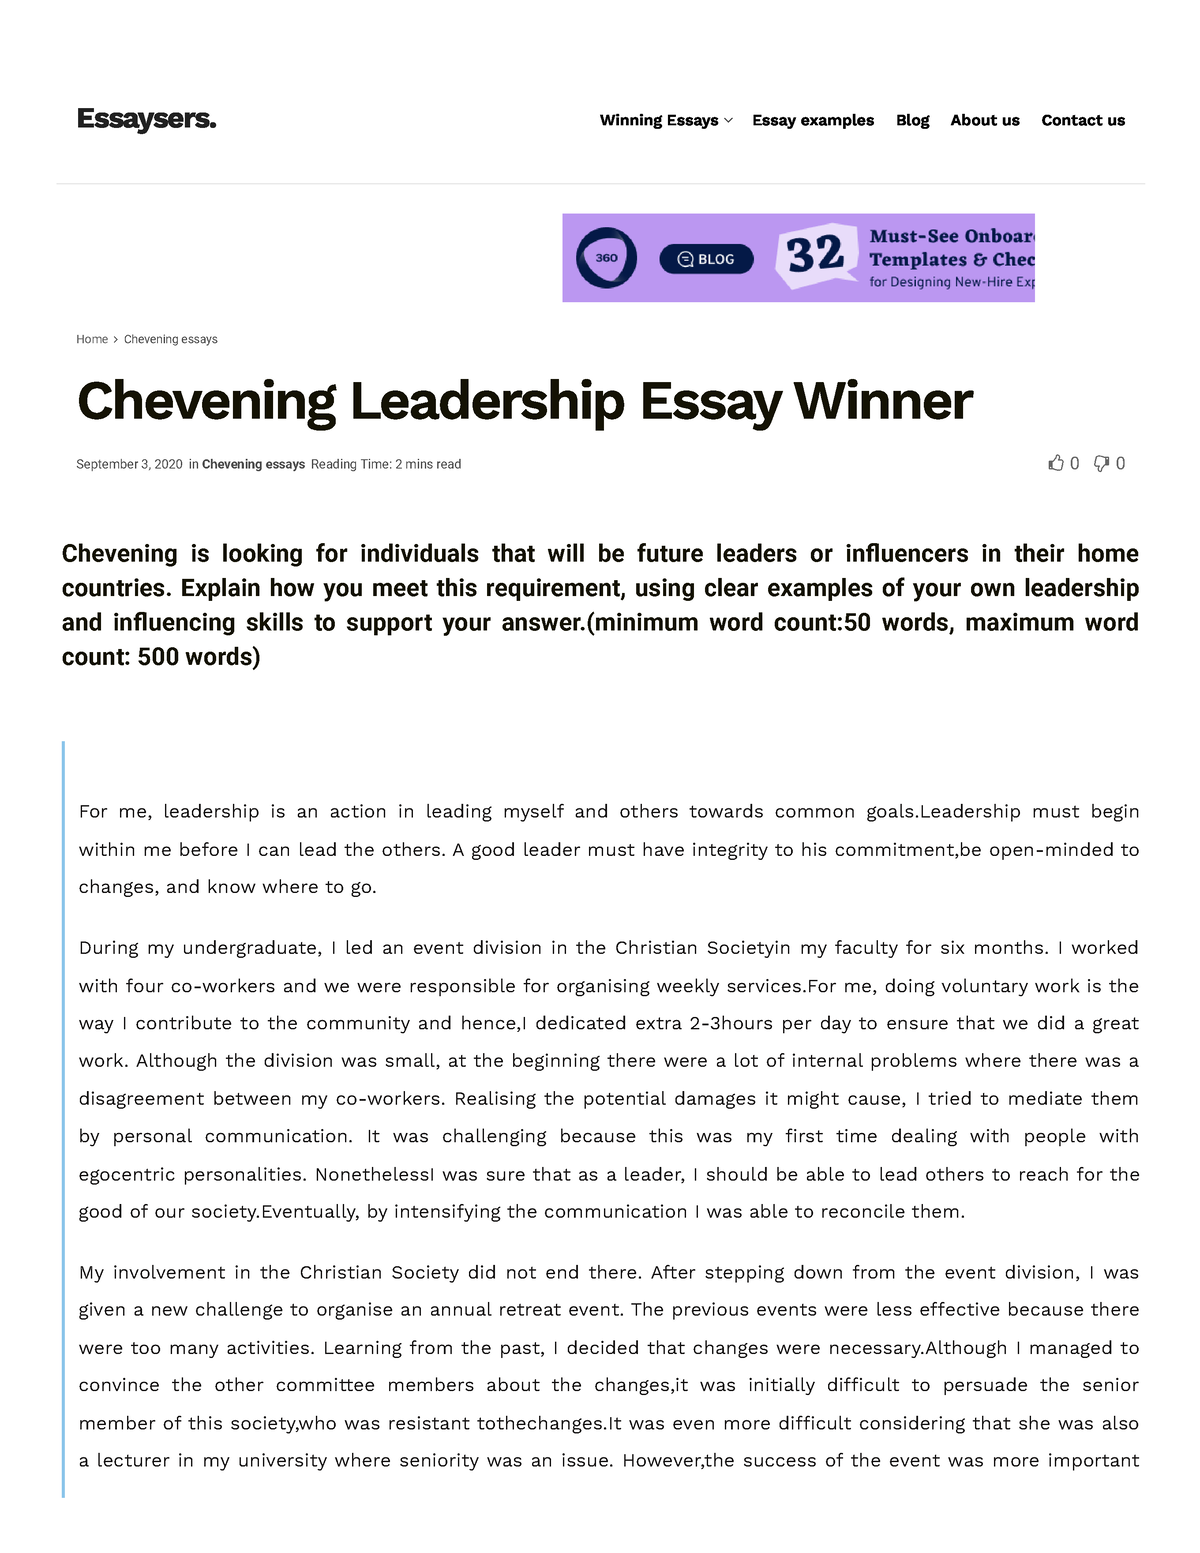 how to write leadership essay for chevening scholarship